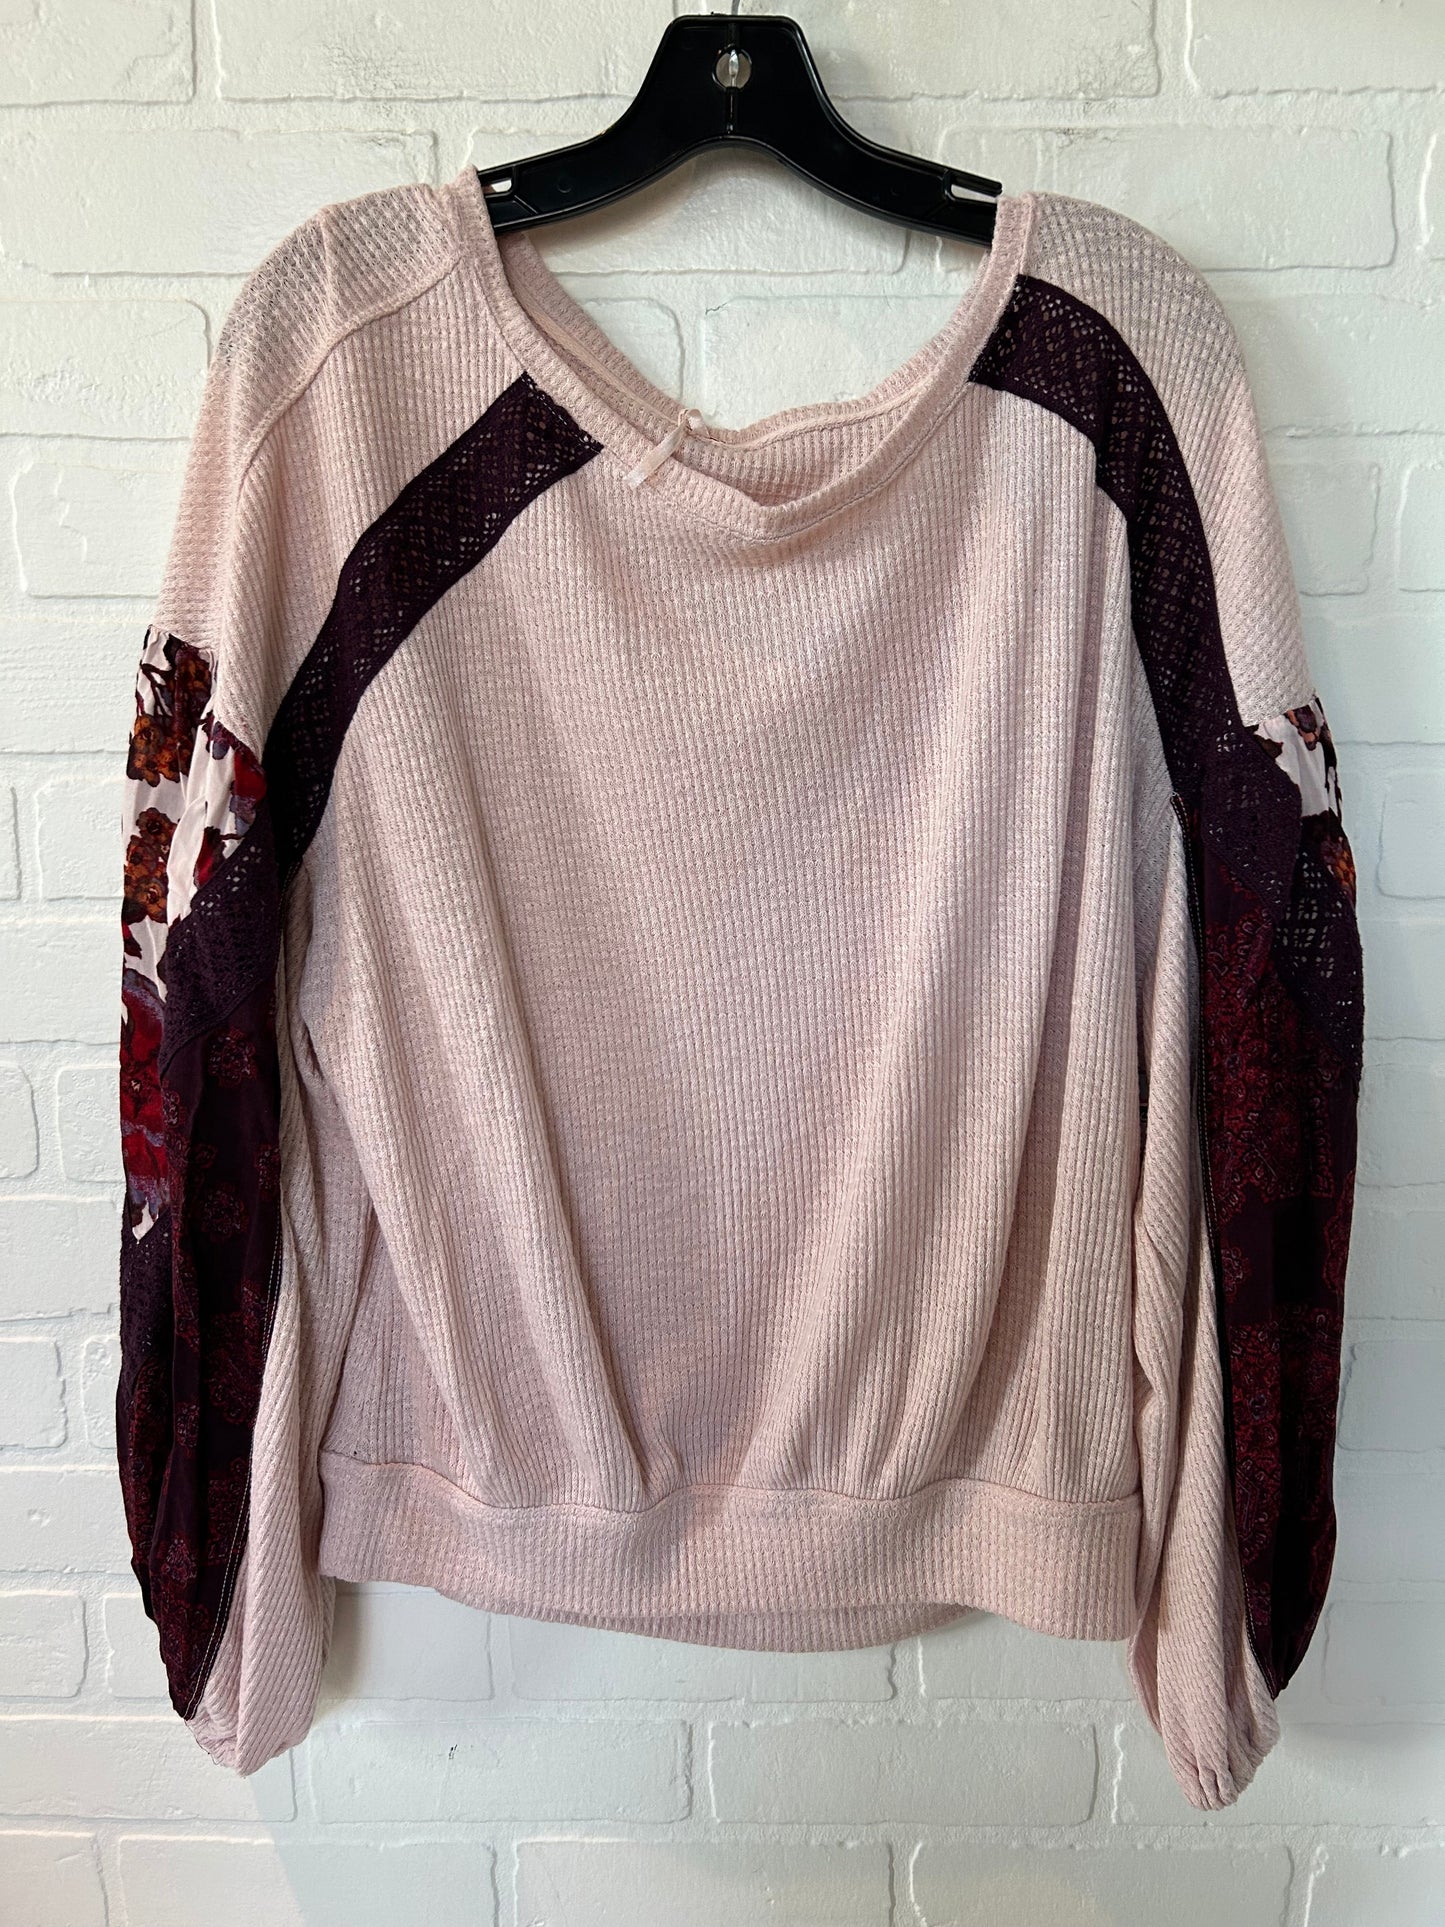 Pink & Purple Top Long Sleeve Free People, Size L